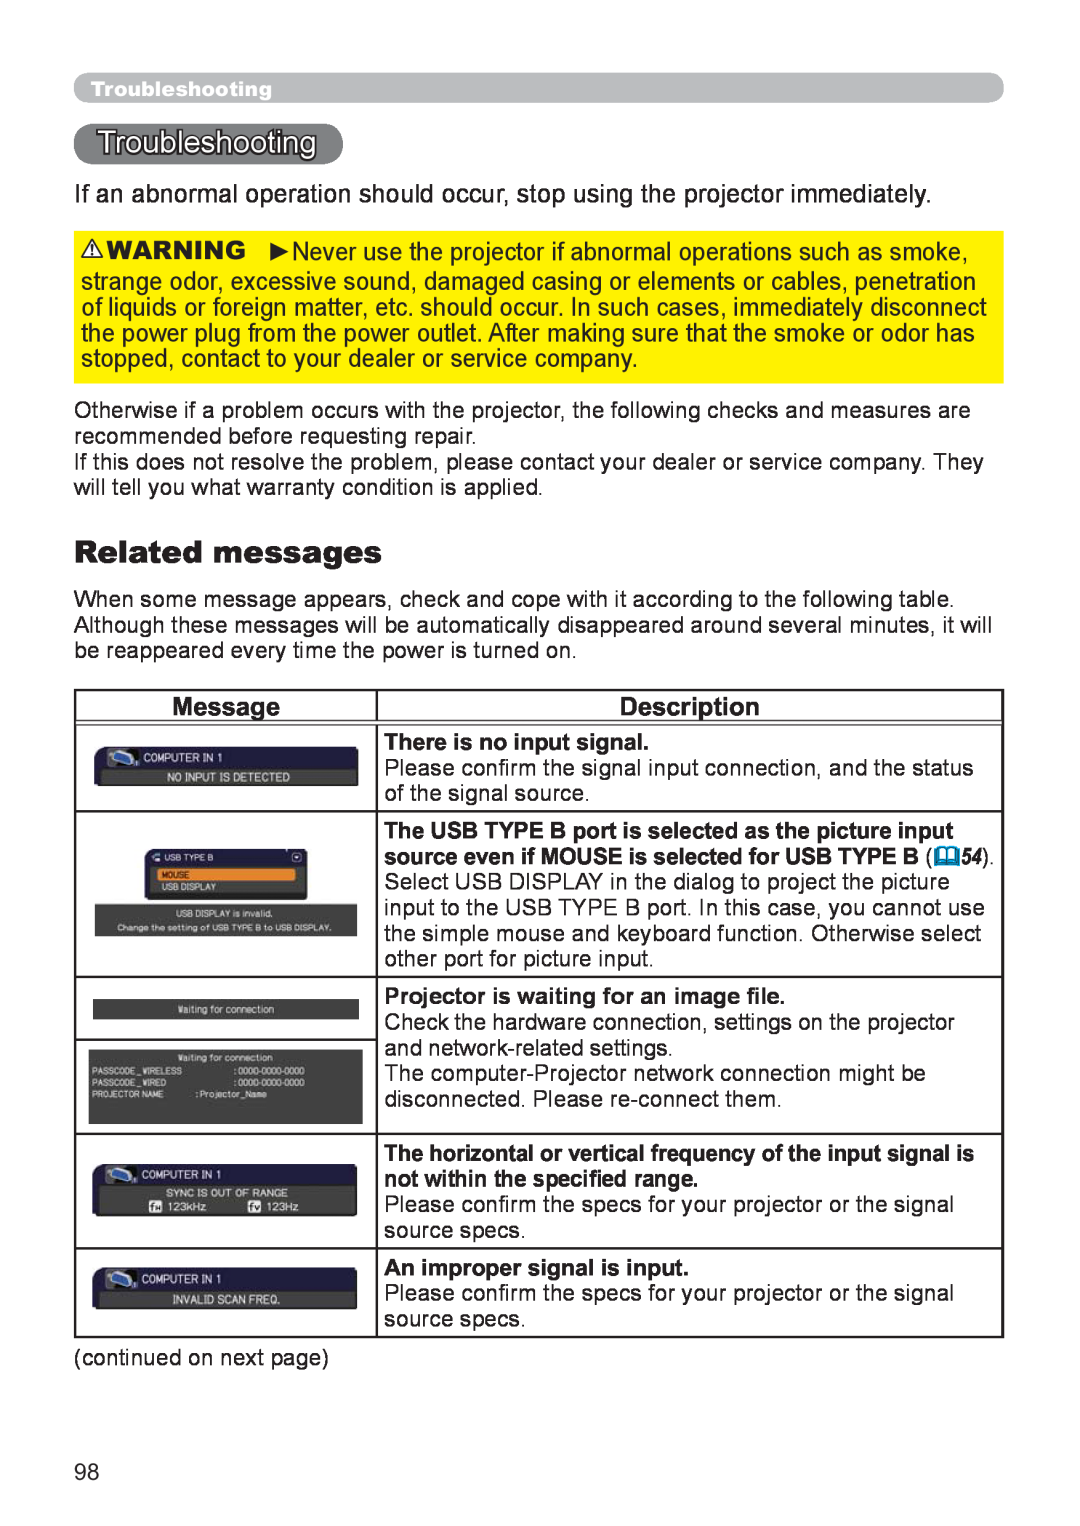 Hitachi CP-X2521WN, CP-X3021WN user manual Troubleshooting, Related messages, Message, Description 